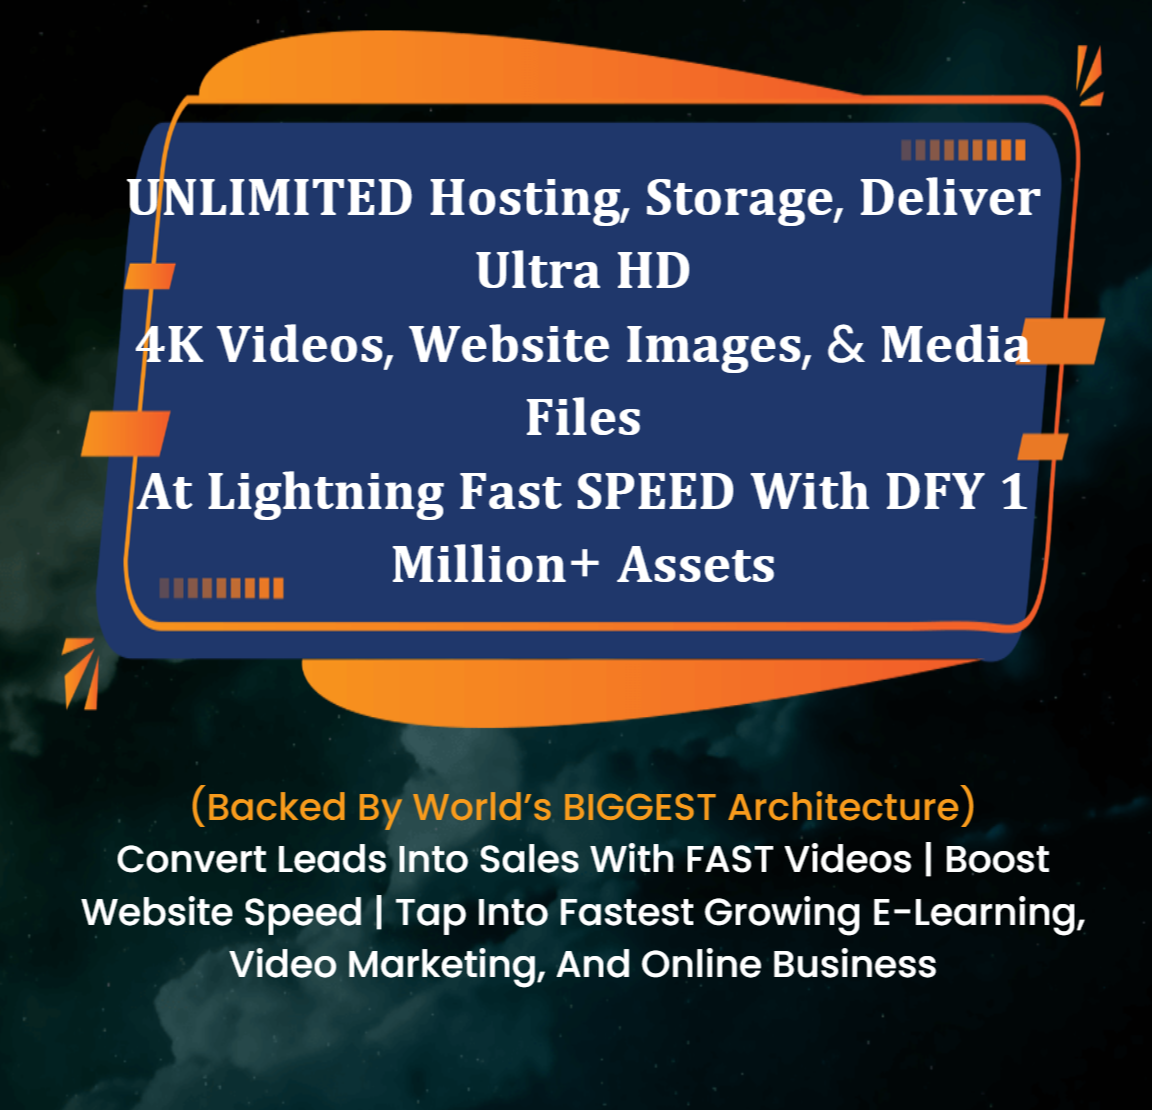 CloudStudio JV CloudStudio Review - Amazing Cloud-Based Platform to Host, Manage and Deliver Unlimited Images, Files, and Videos at Lightning-Fast Speed with Zero Tech Hassles!